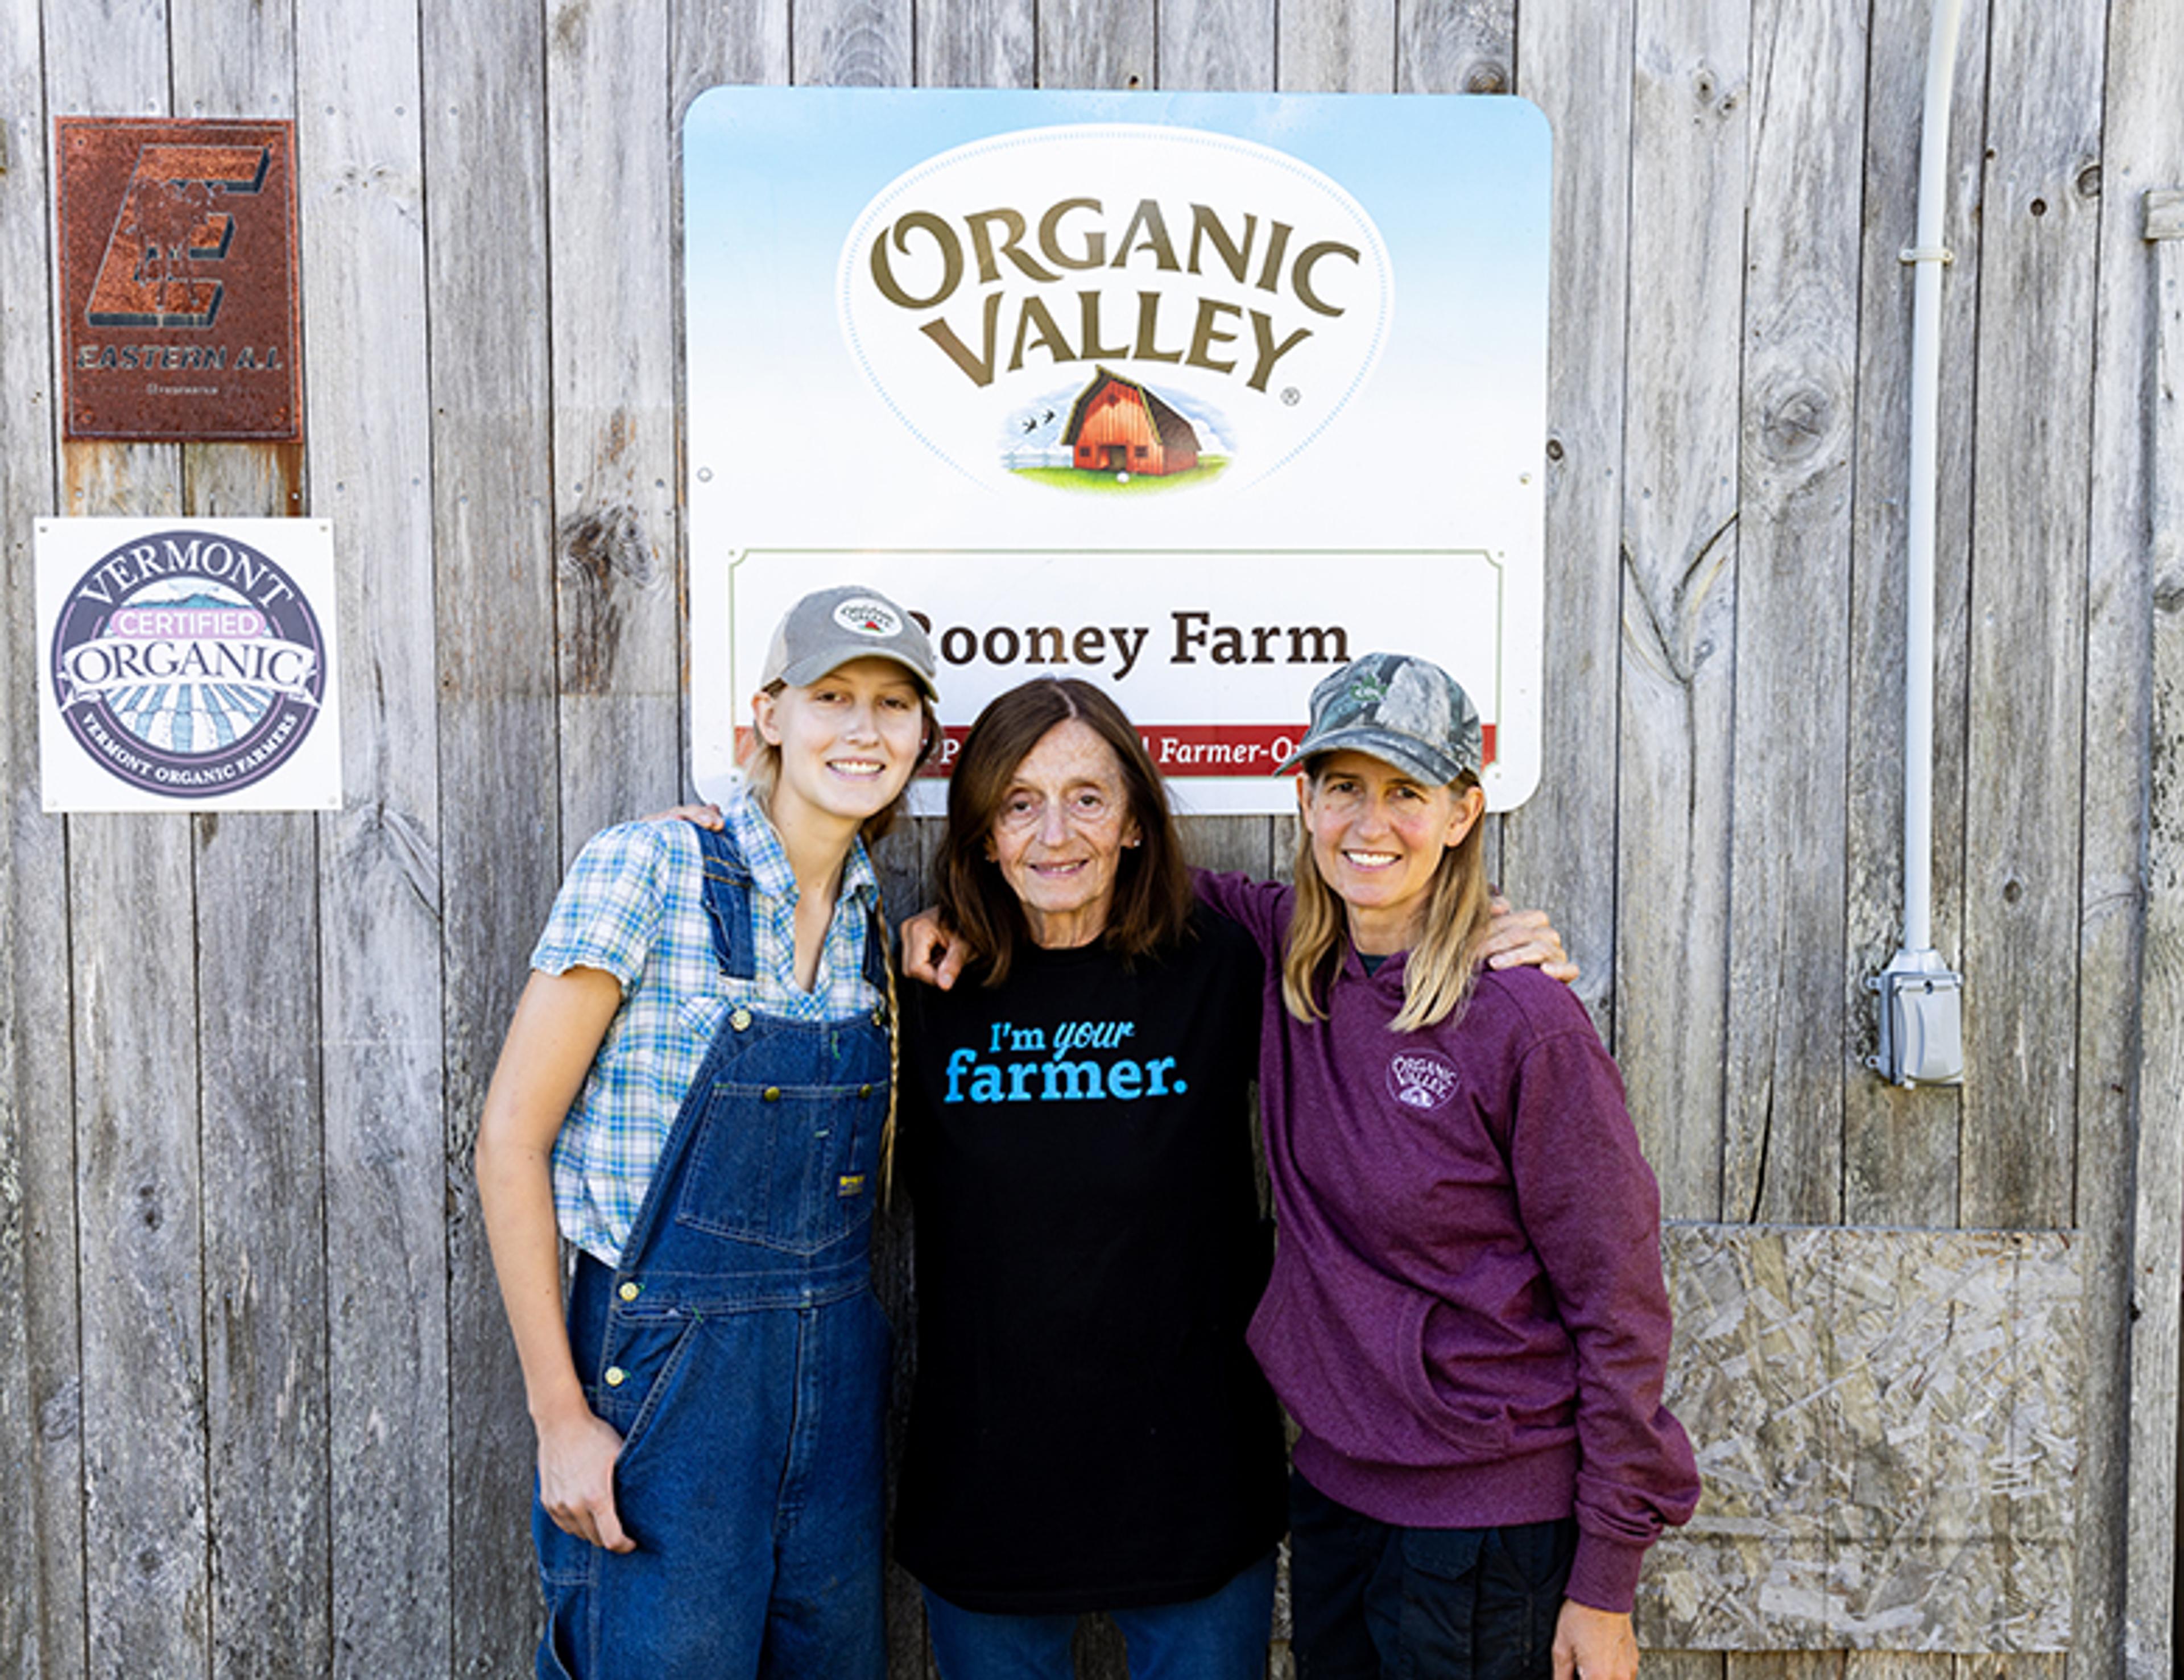 Rooney farmers stand in front of Organic Valley barn sign.